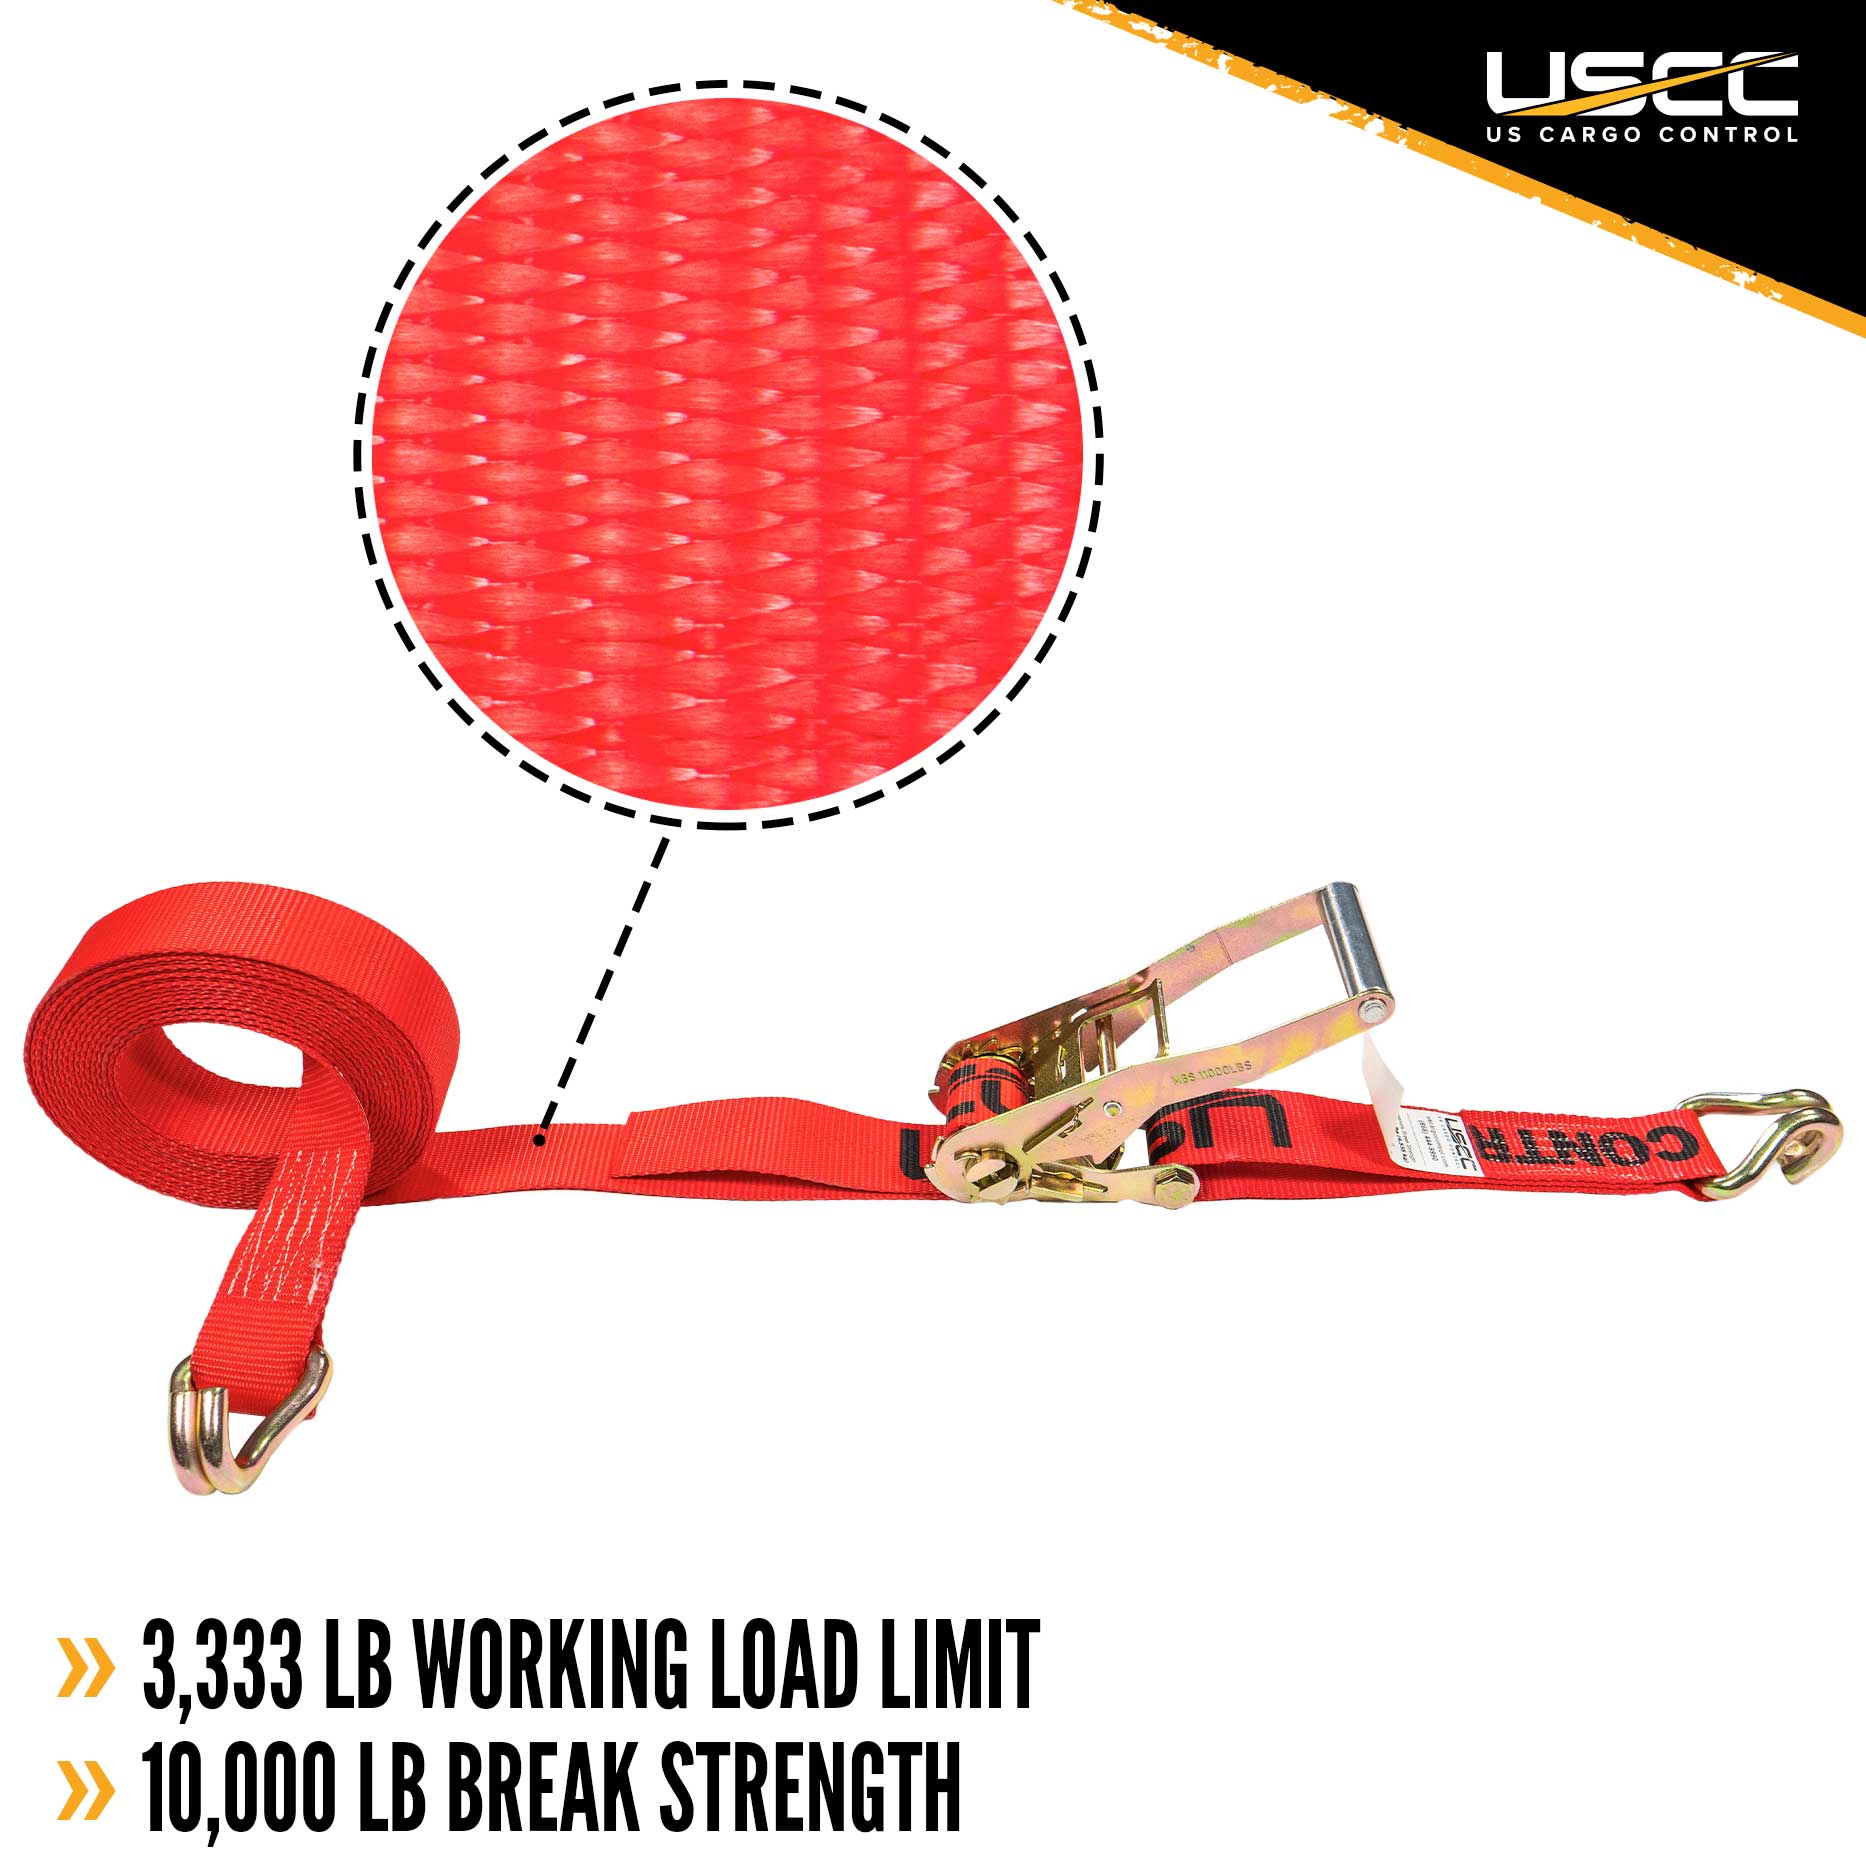 2" x 24' Red Ratchet Strap w/ Double J Hook